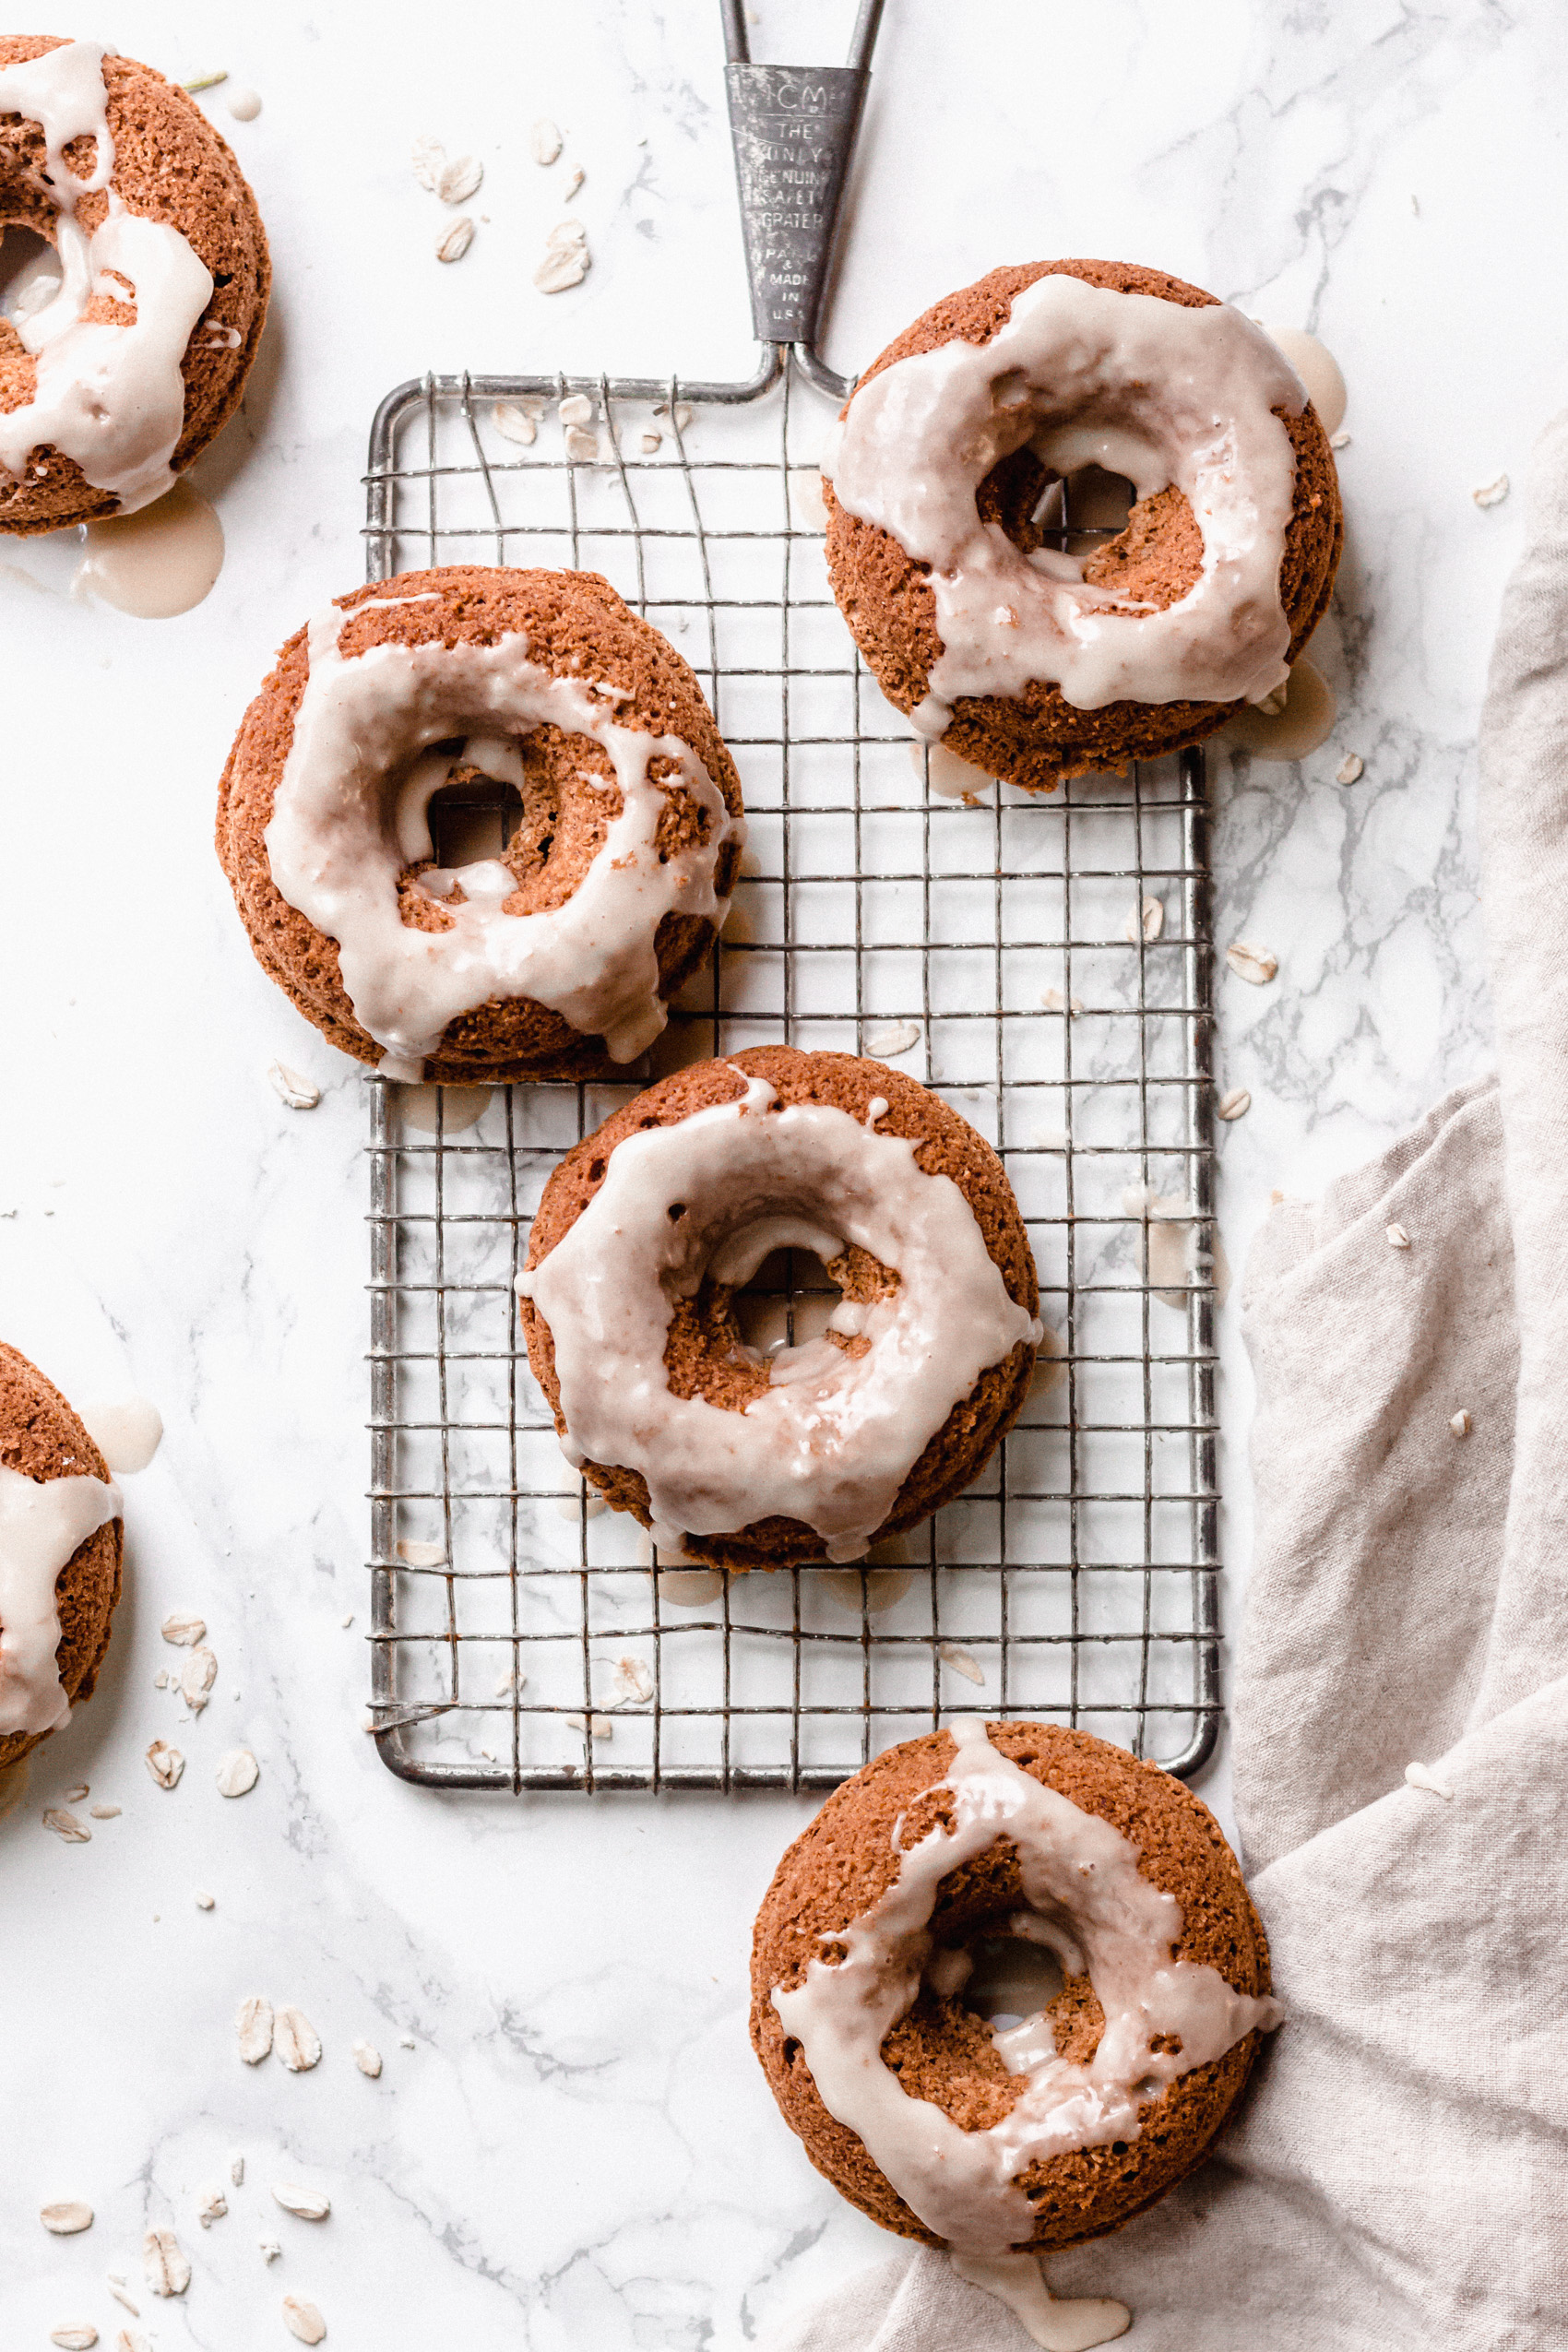 six baked cinnamon donuts, each topped with a maple glaze served on a metal wire serving tray resting on a white counter top next to a linen towel